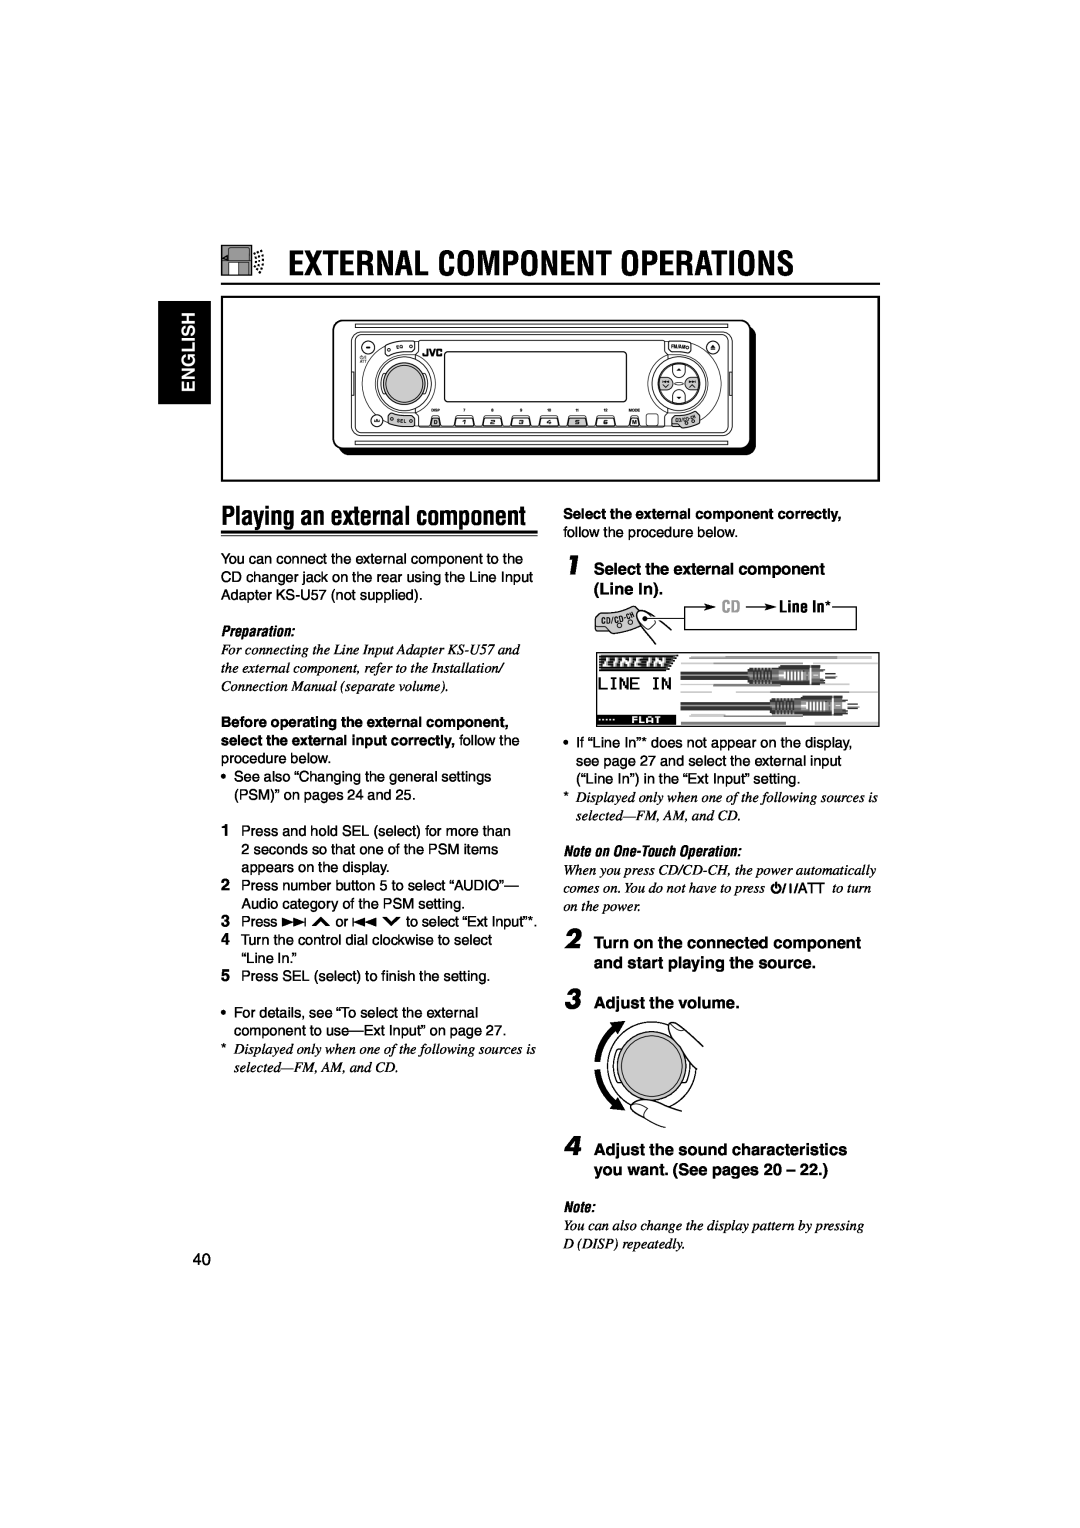 JVC KD-LH1150 External Component Operations, Playing an external component, English, Select the external component Line In 